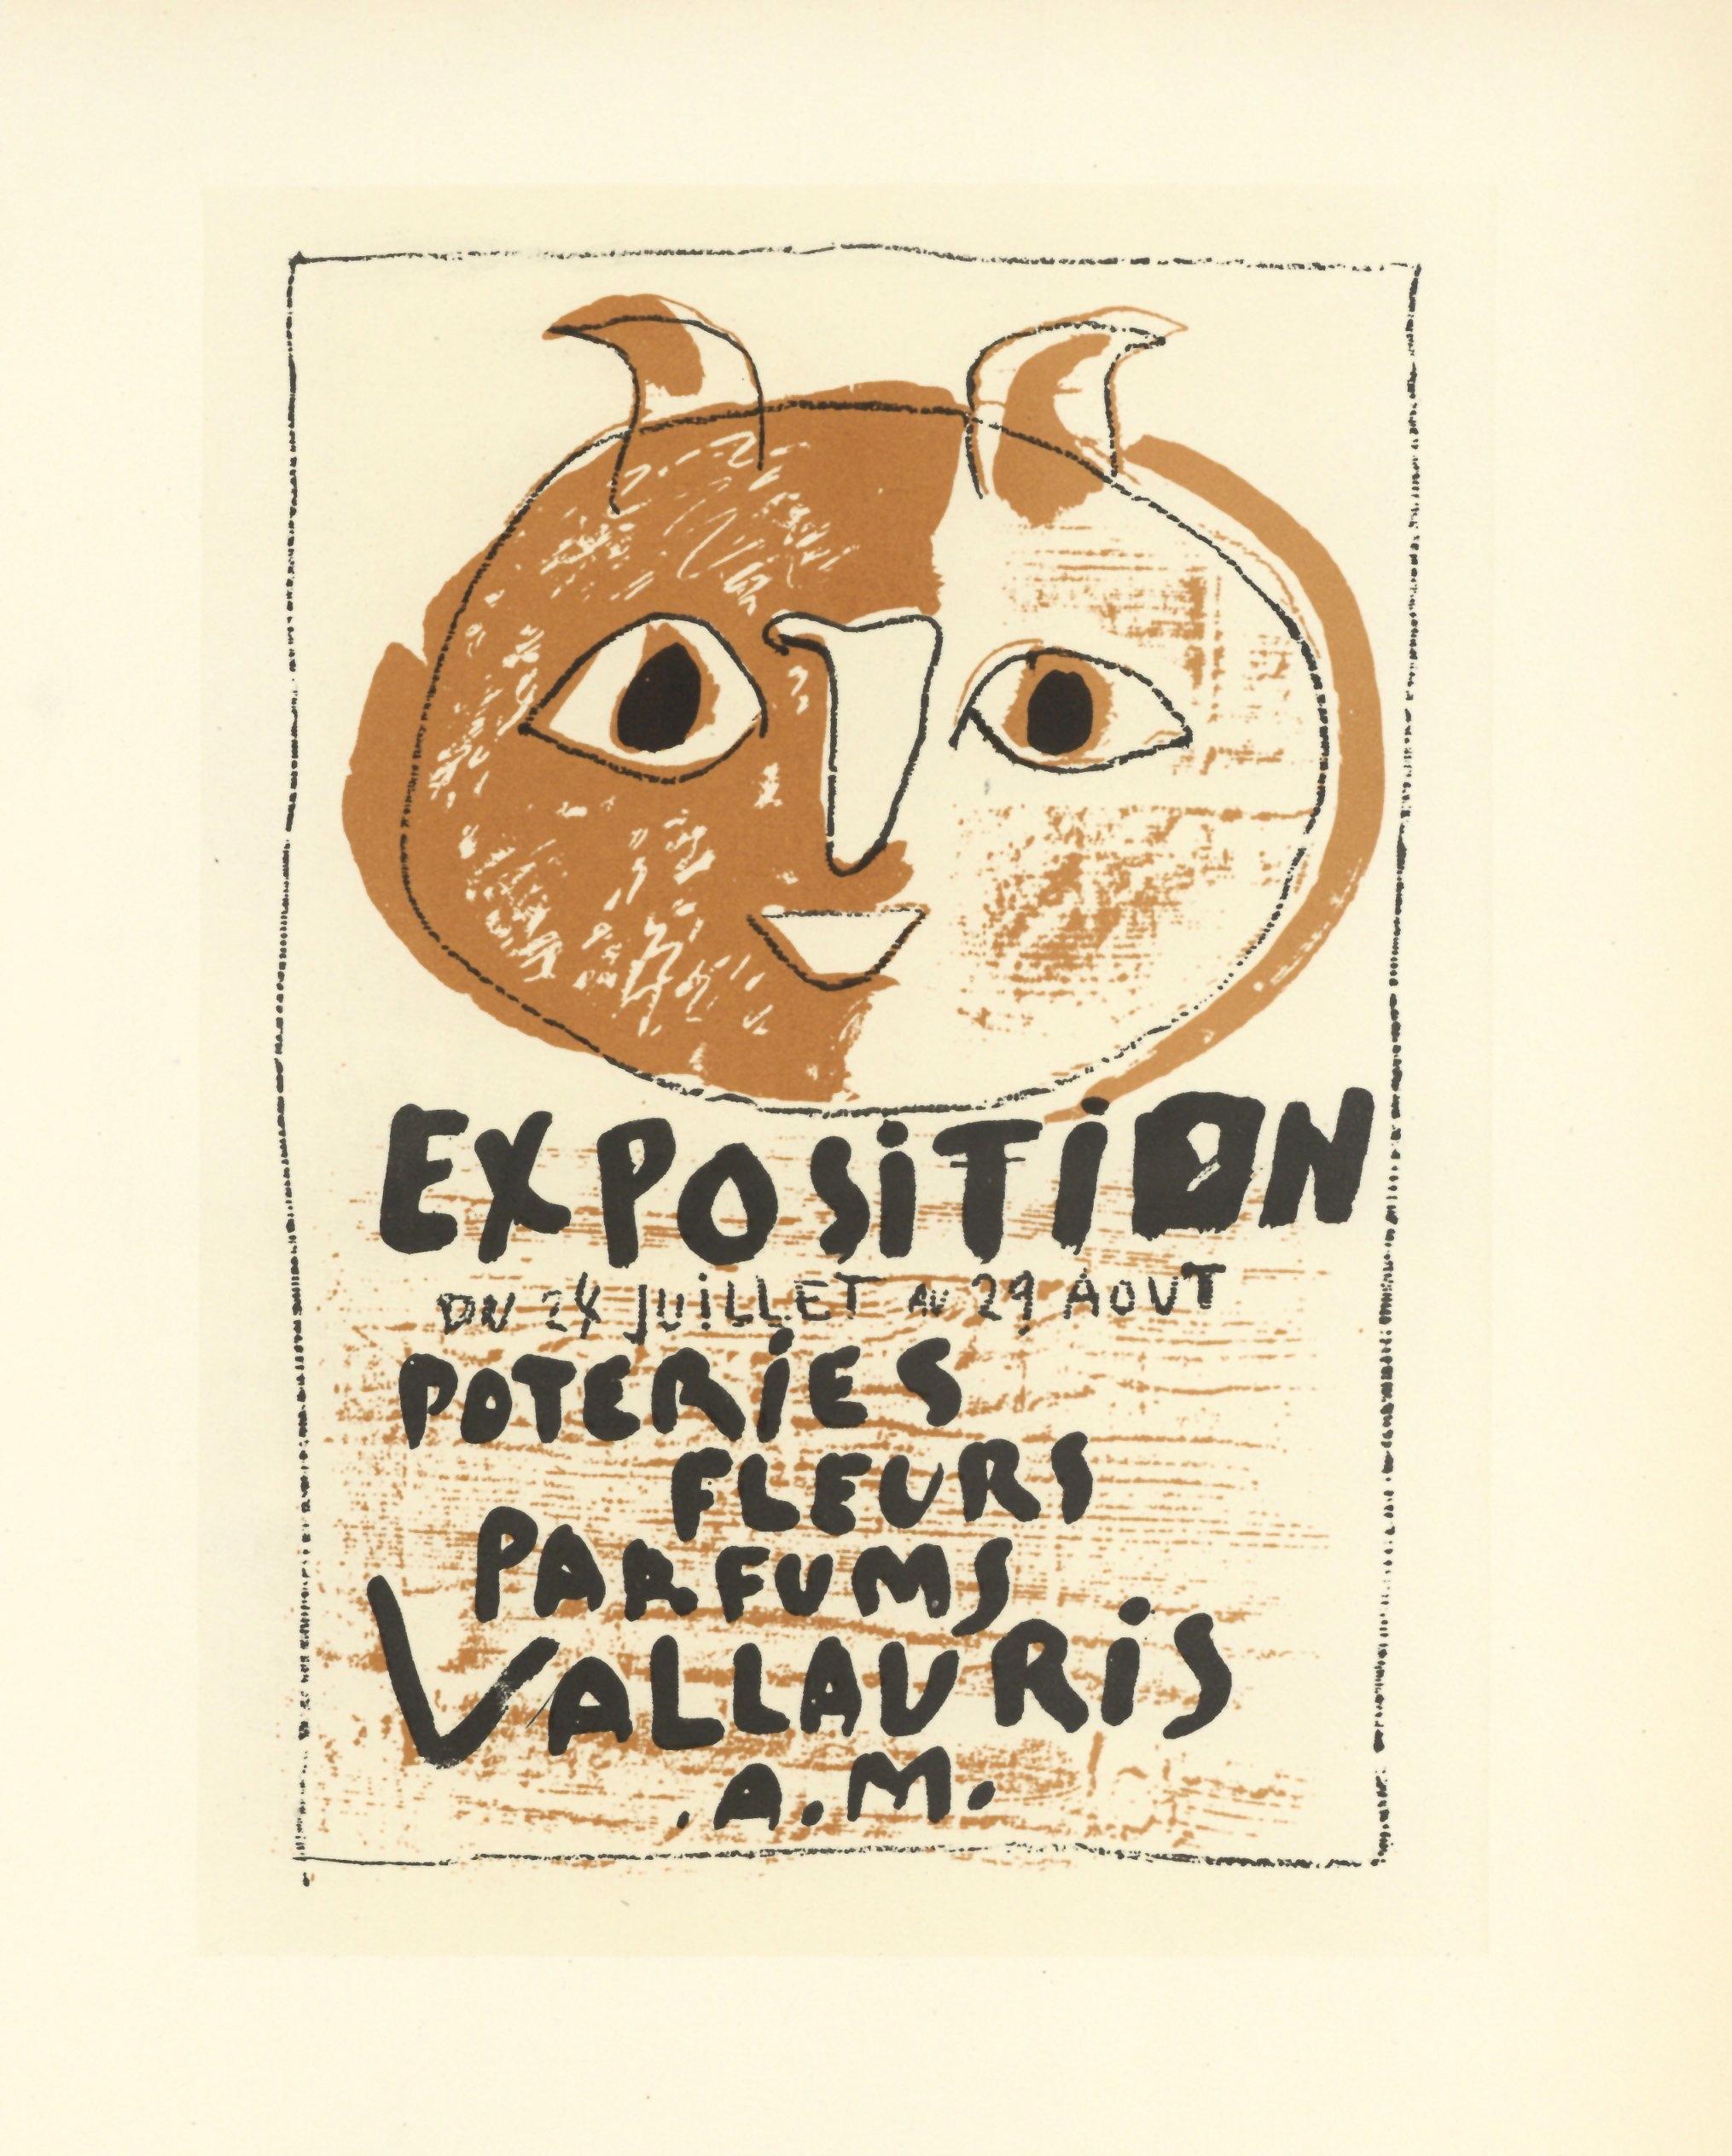 "Exposition Poteries, Fleurs, Parfums" lithograph poster - Print by (after) Pablo Picasso